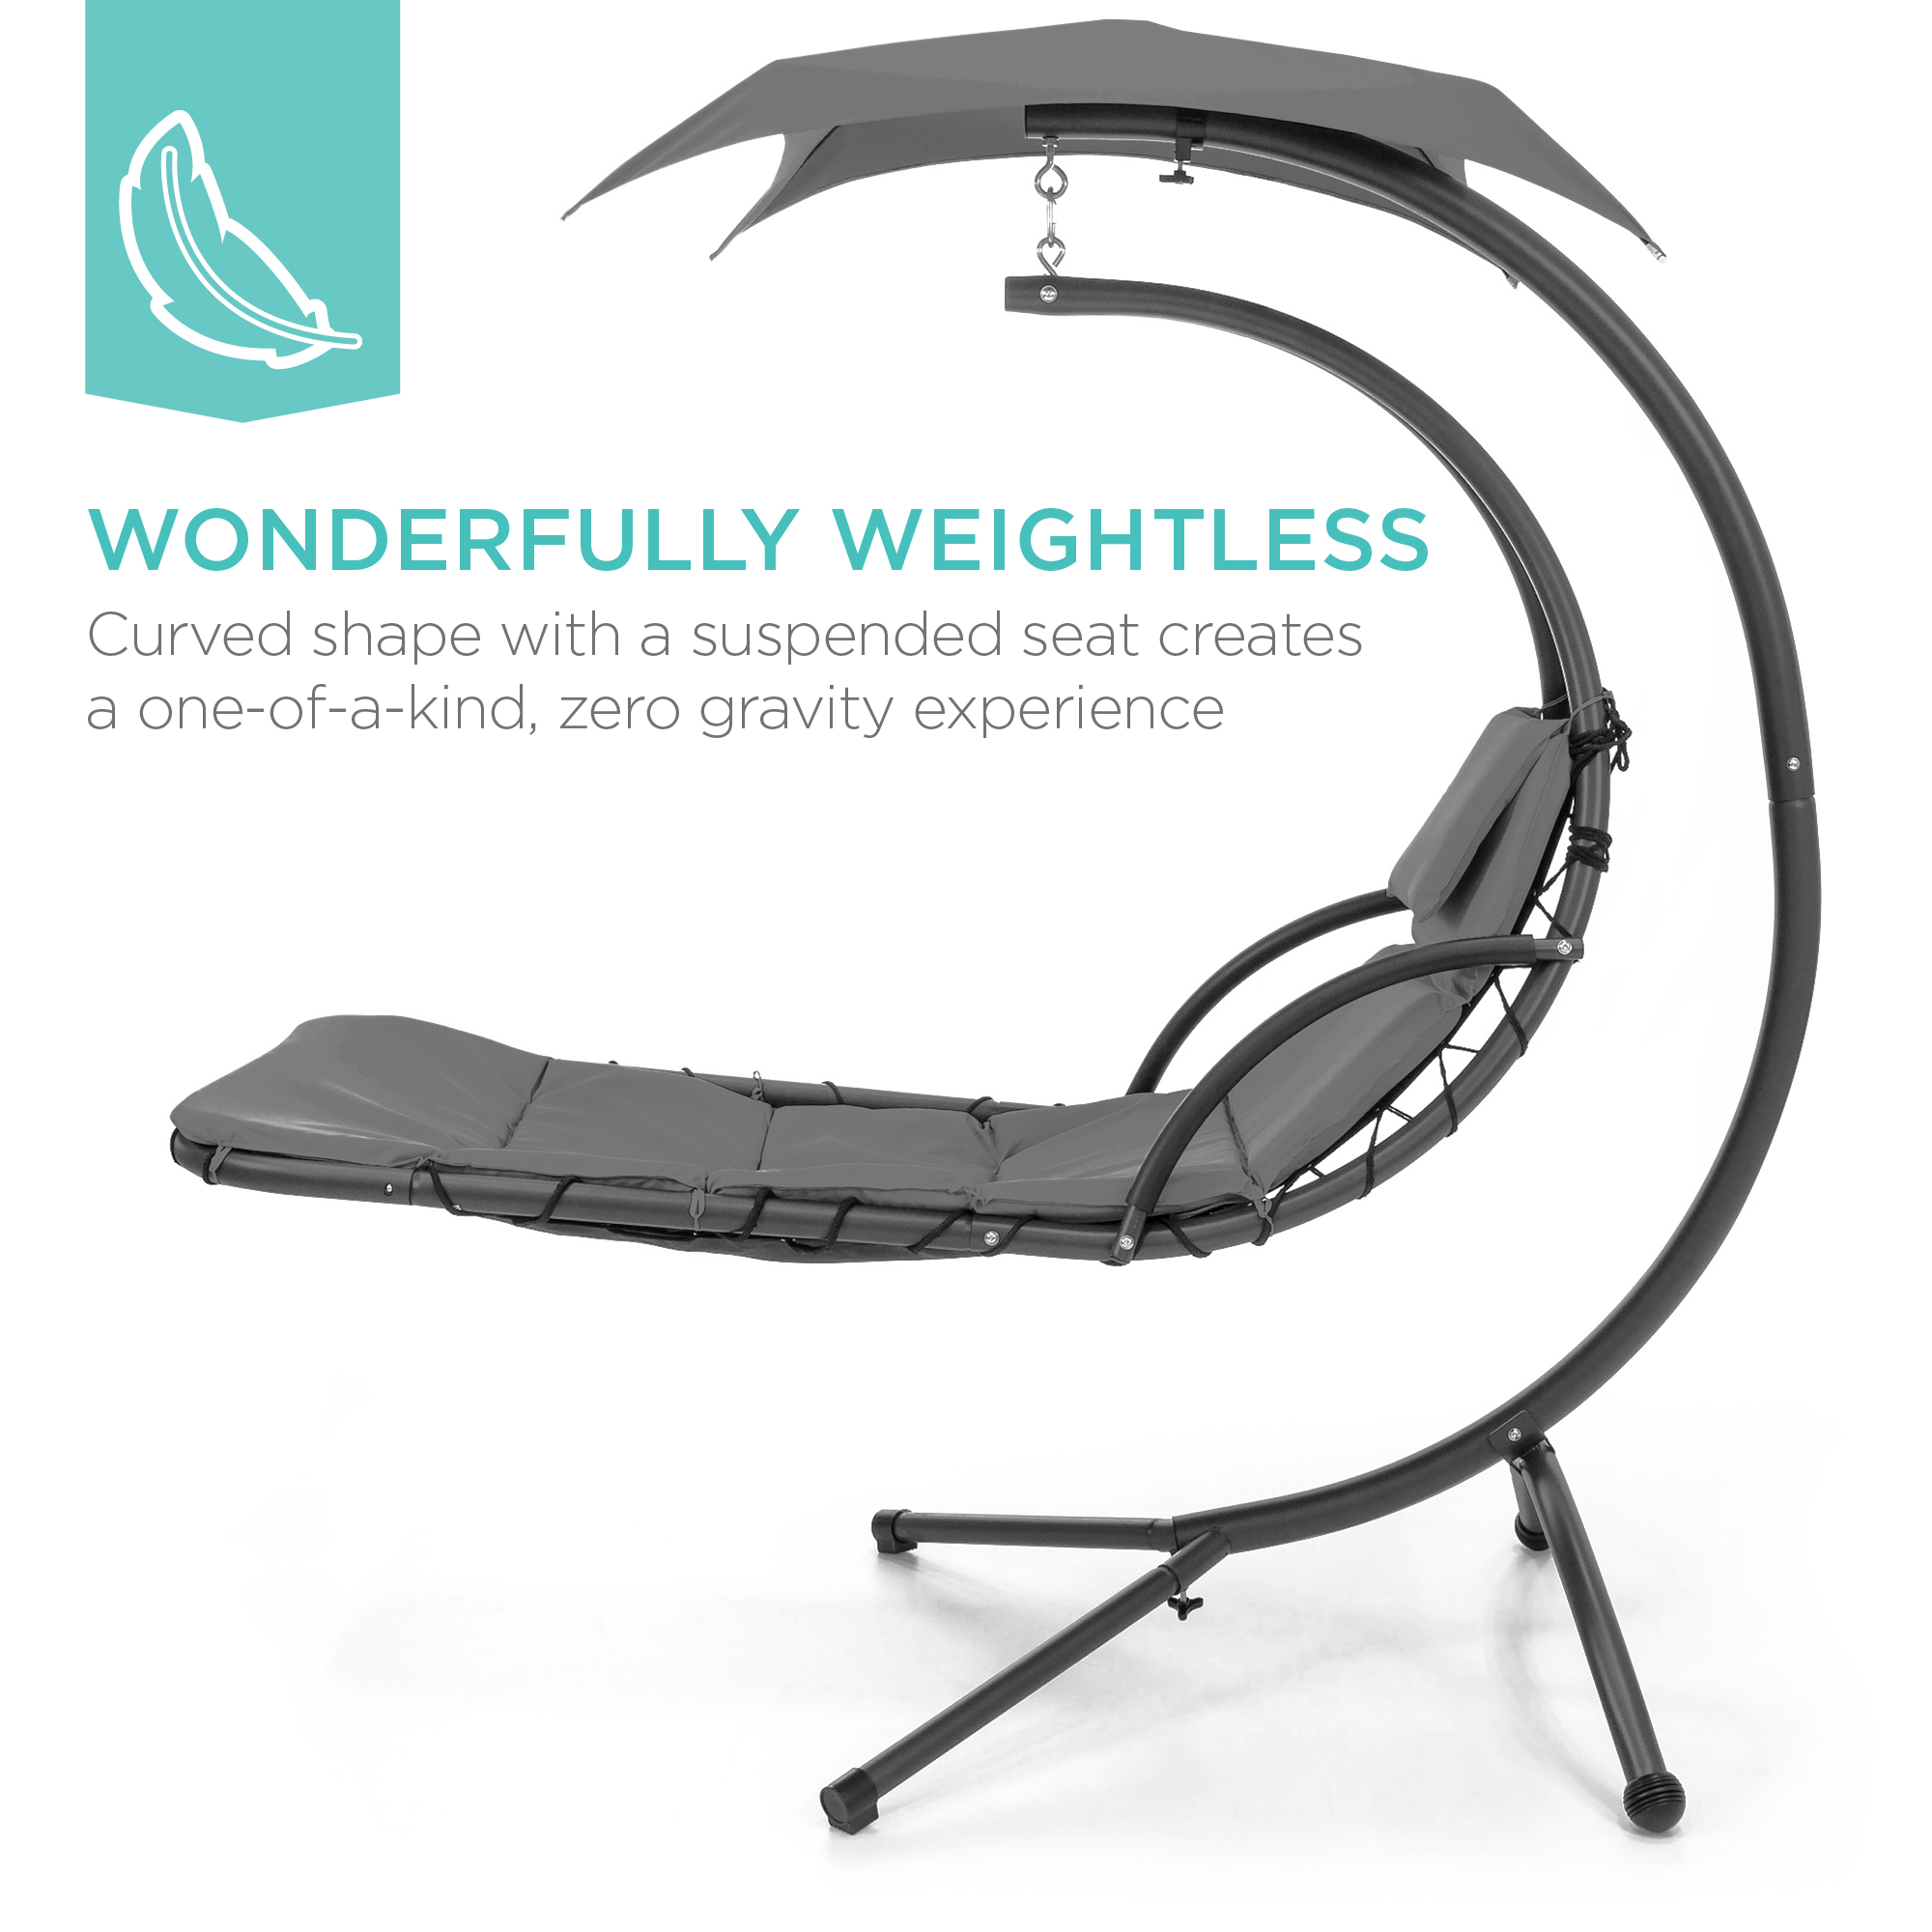 Best Choice Products Hanging Curved Chaise Lounge Chair Swing for Backyard w/ Pillow, Shade, Stand - Charcoal Gray - image 3 of 8